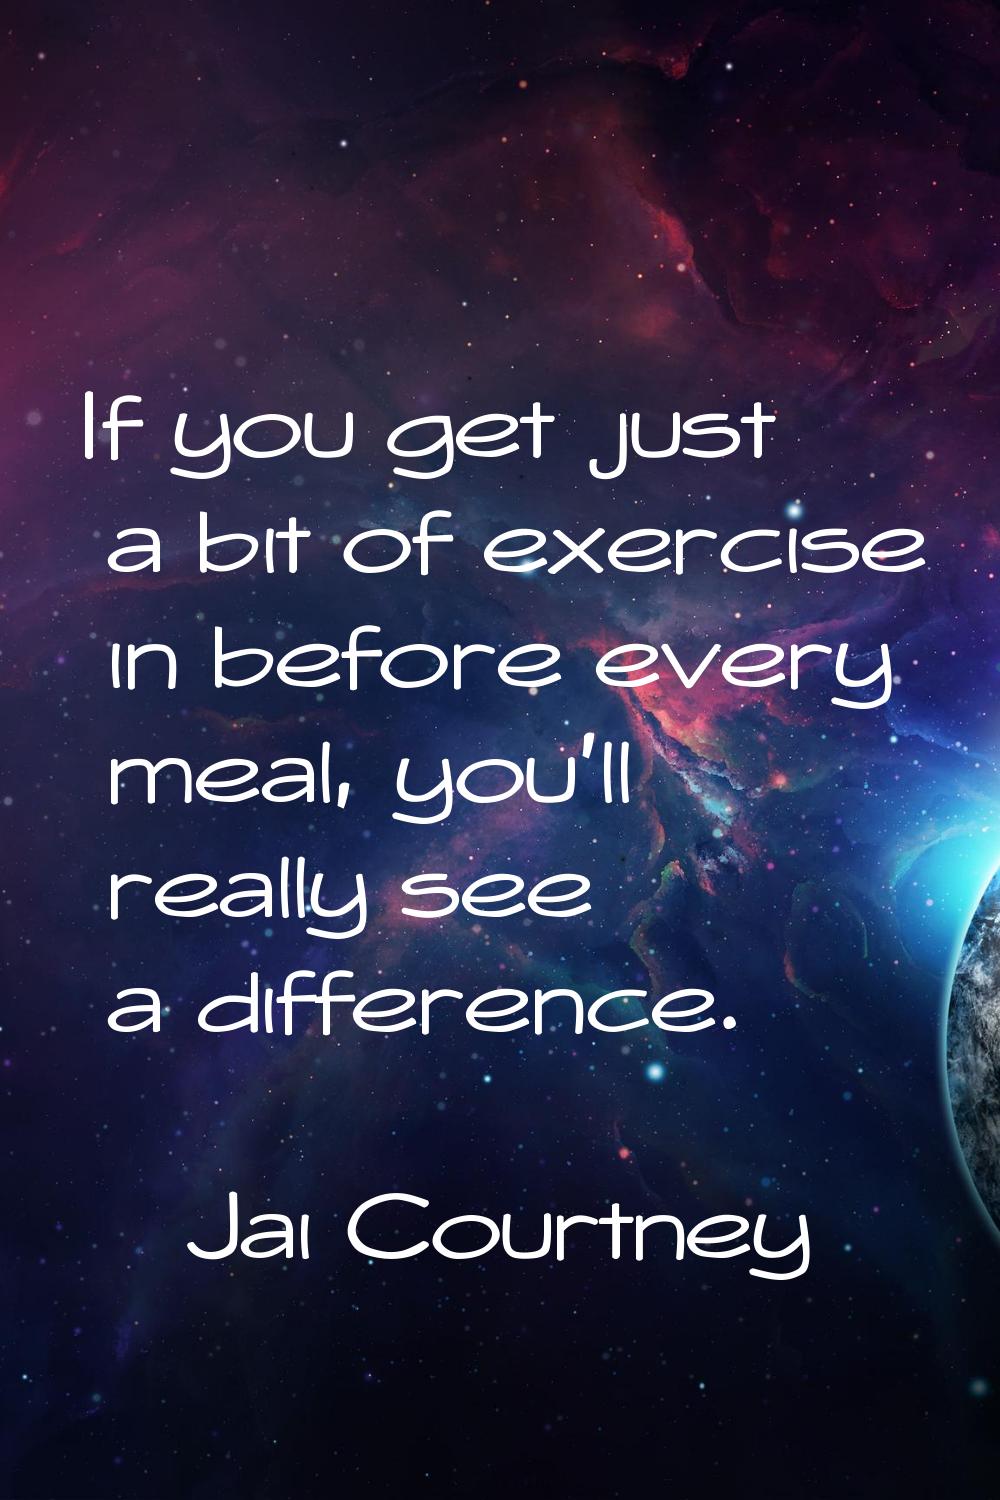 If you get just a bit of exercise in before every meal, you'll really see a difference.